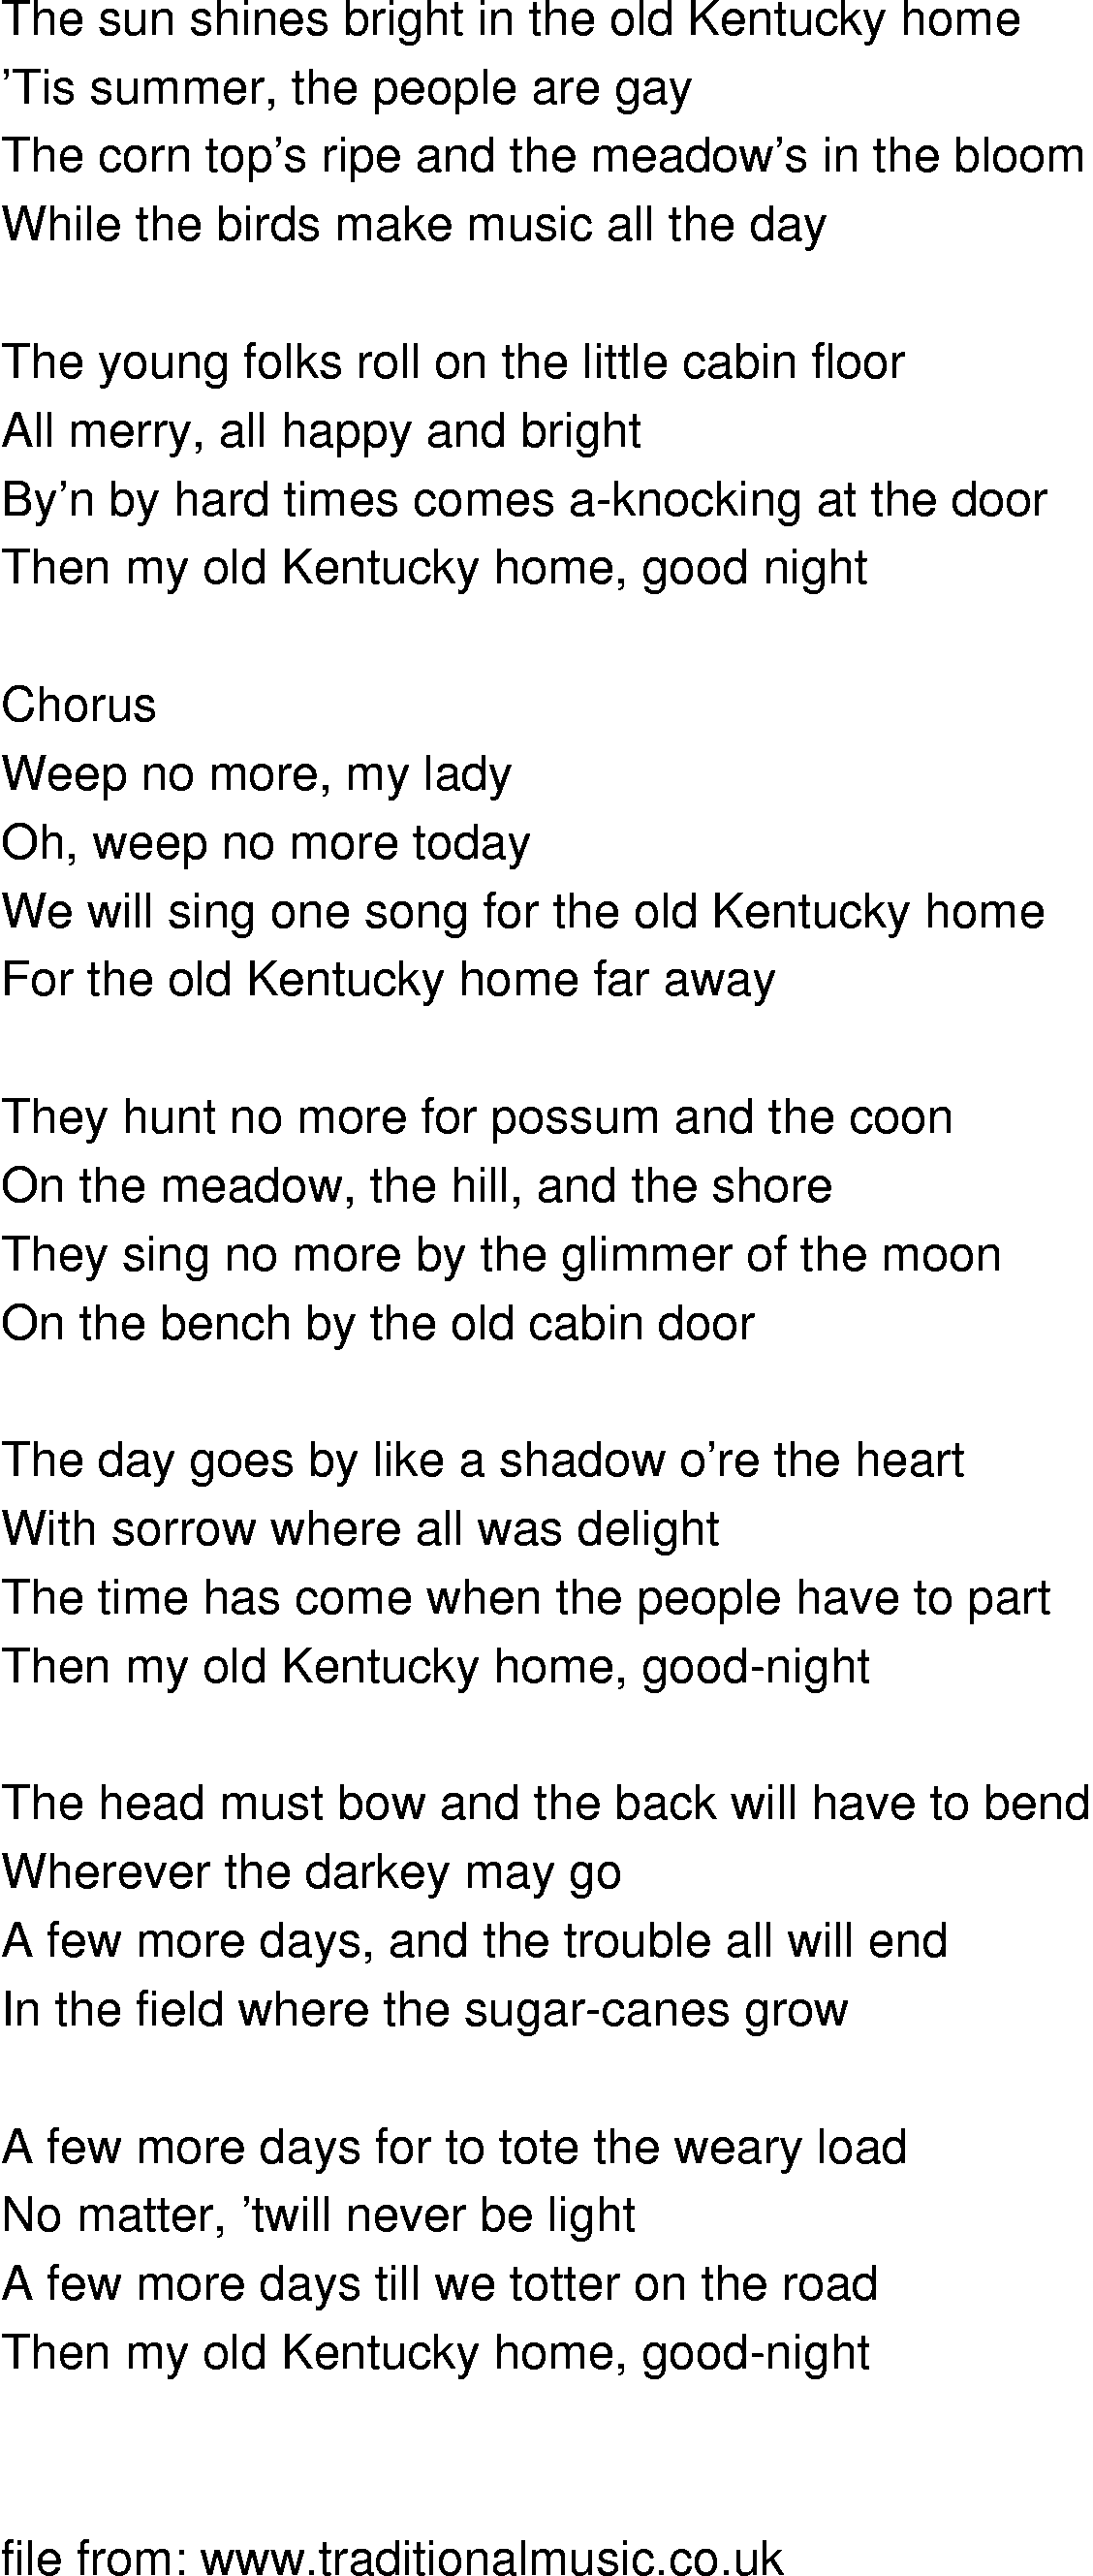 Old Time Song Lyrics My Old Kentucky Home 